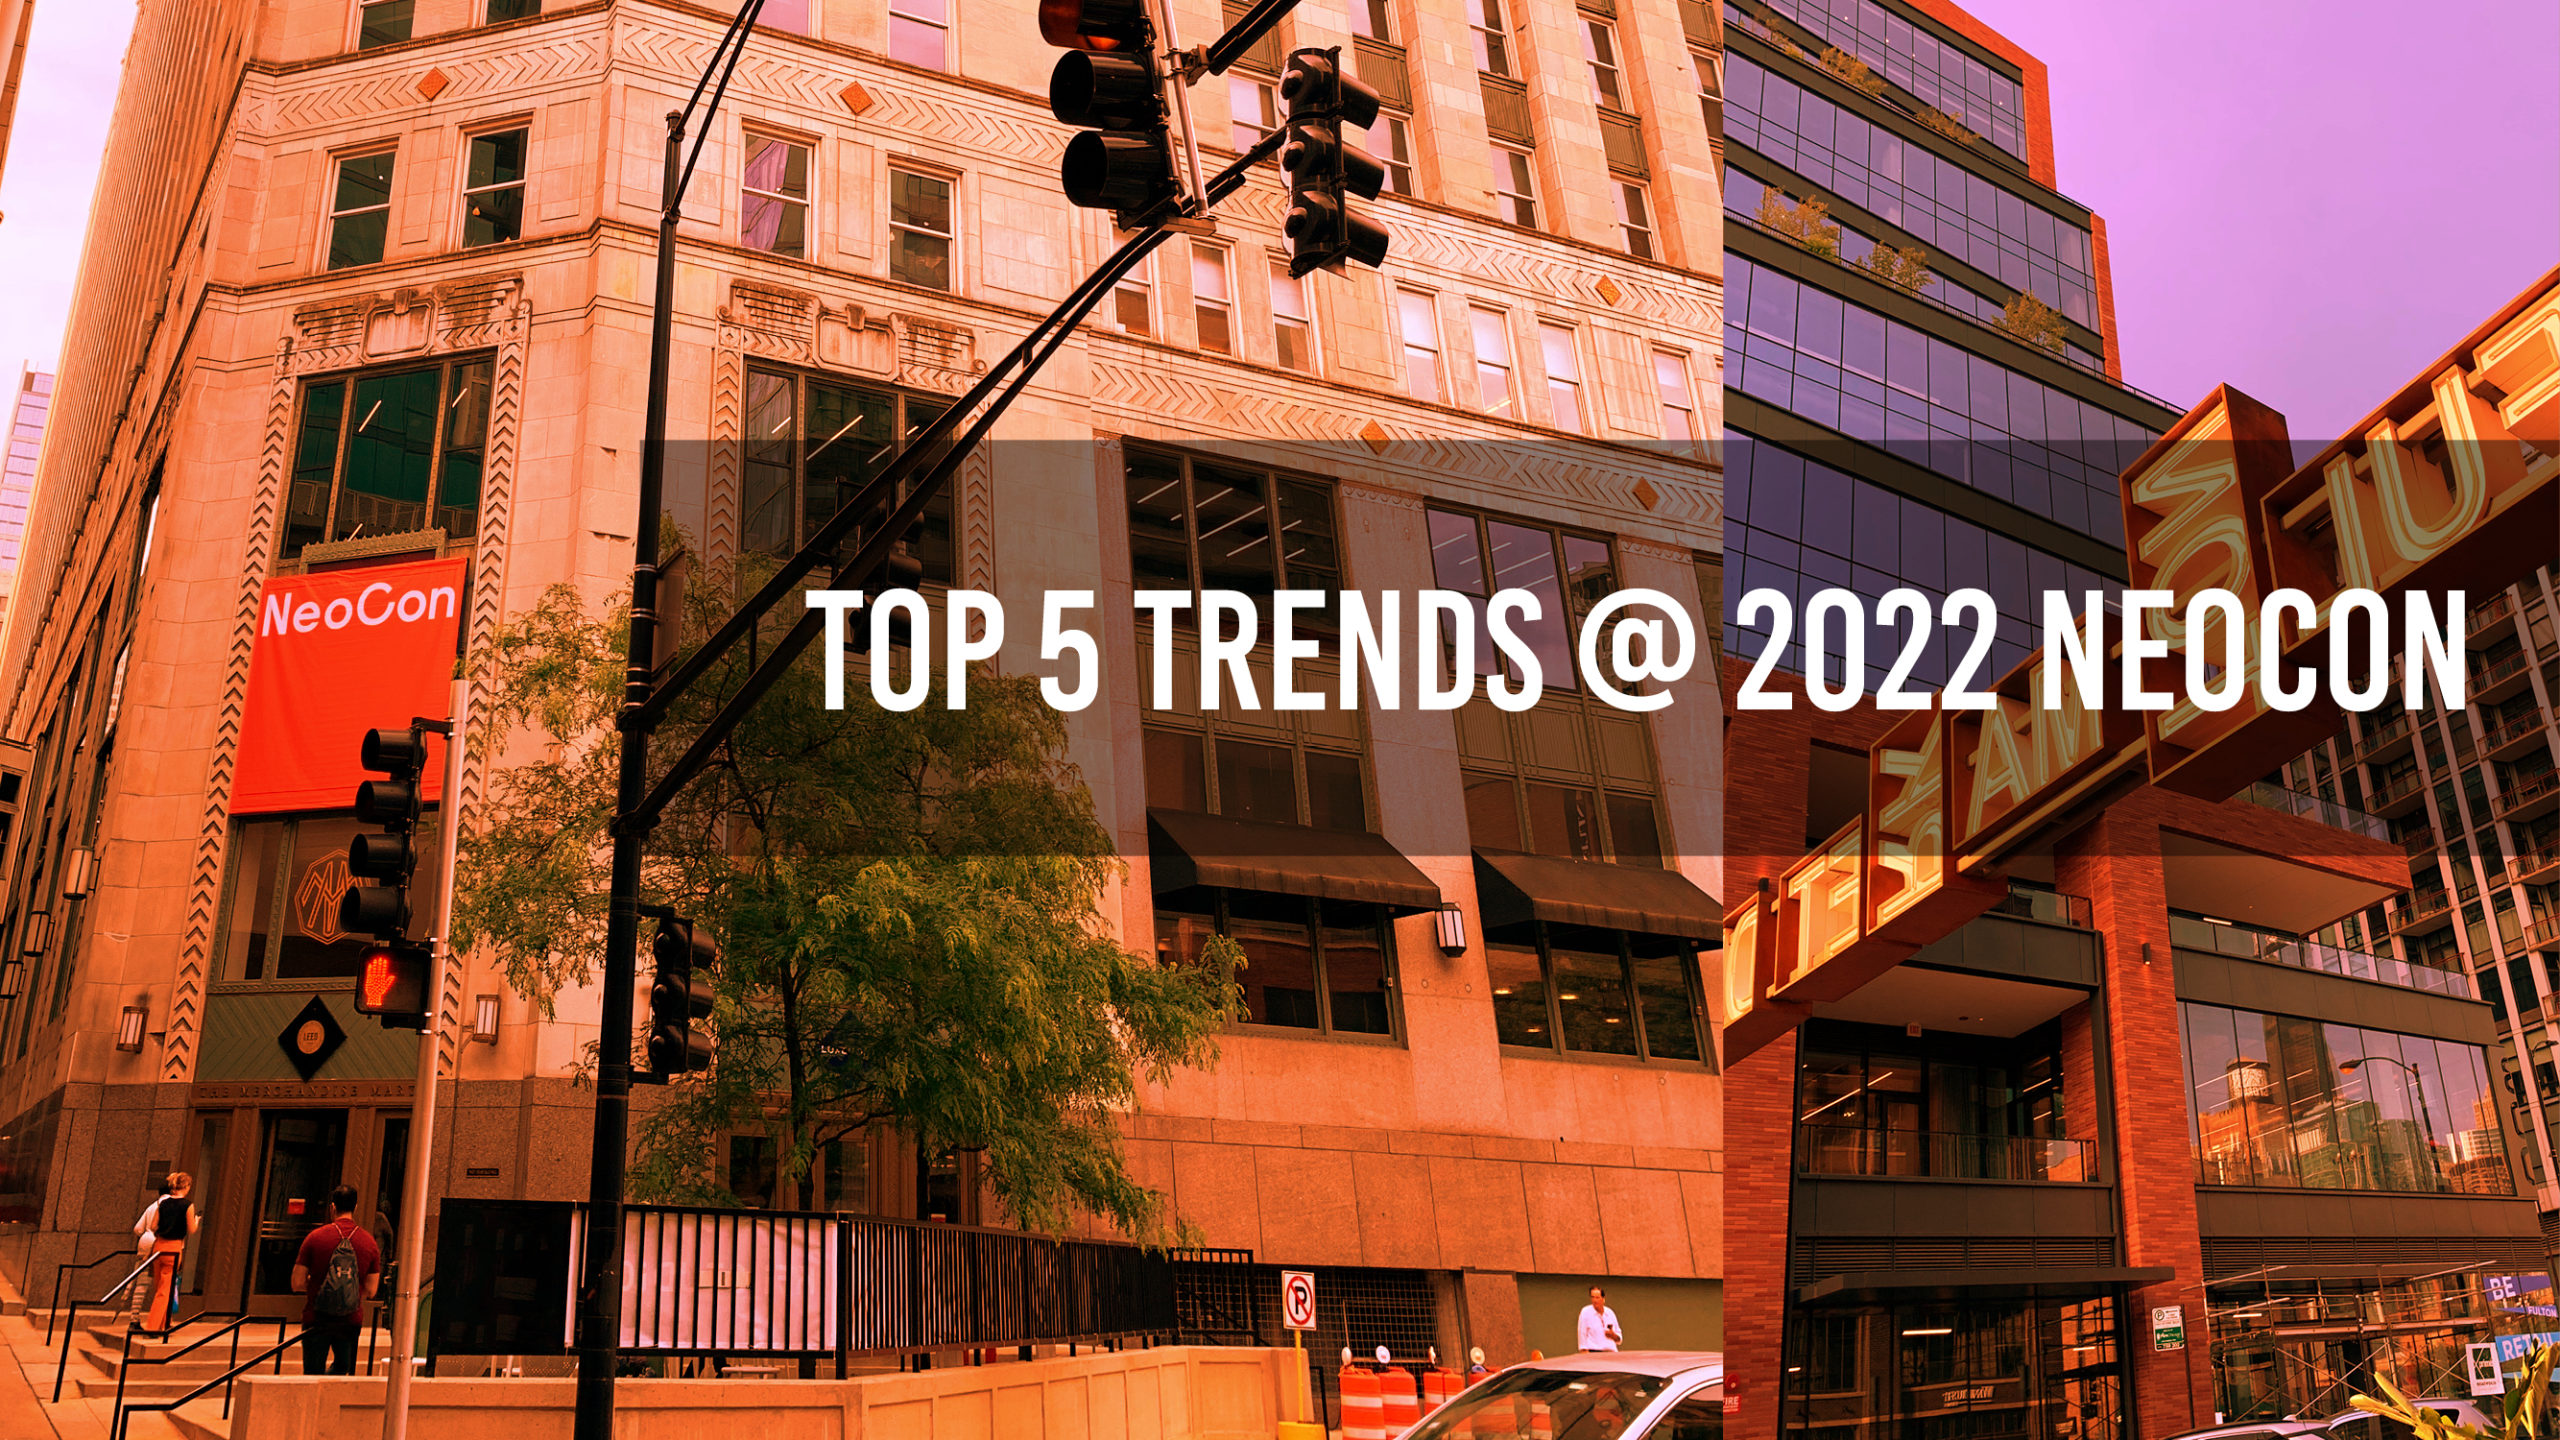 Top 5 Trends Spotted at 2022 NeoCon